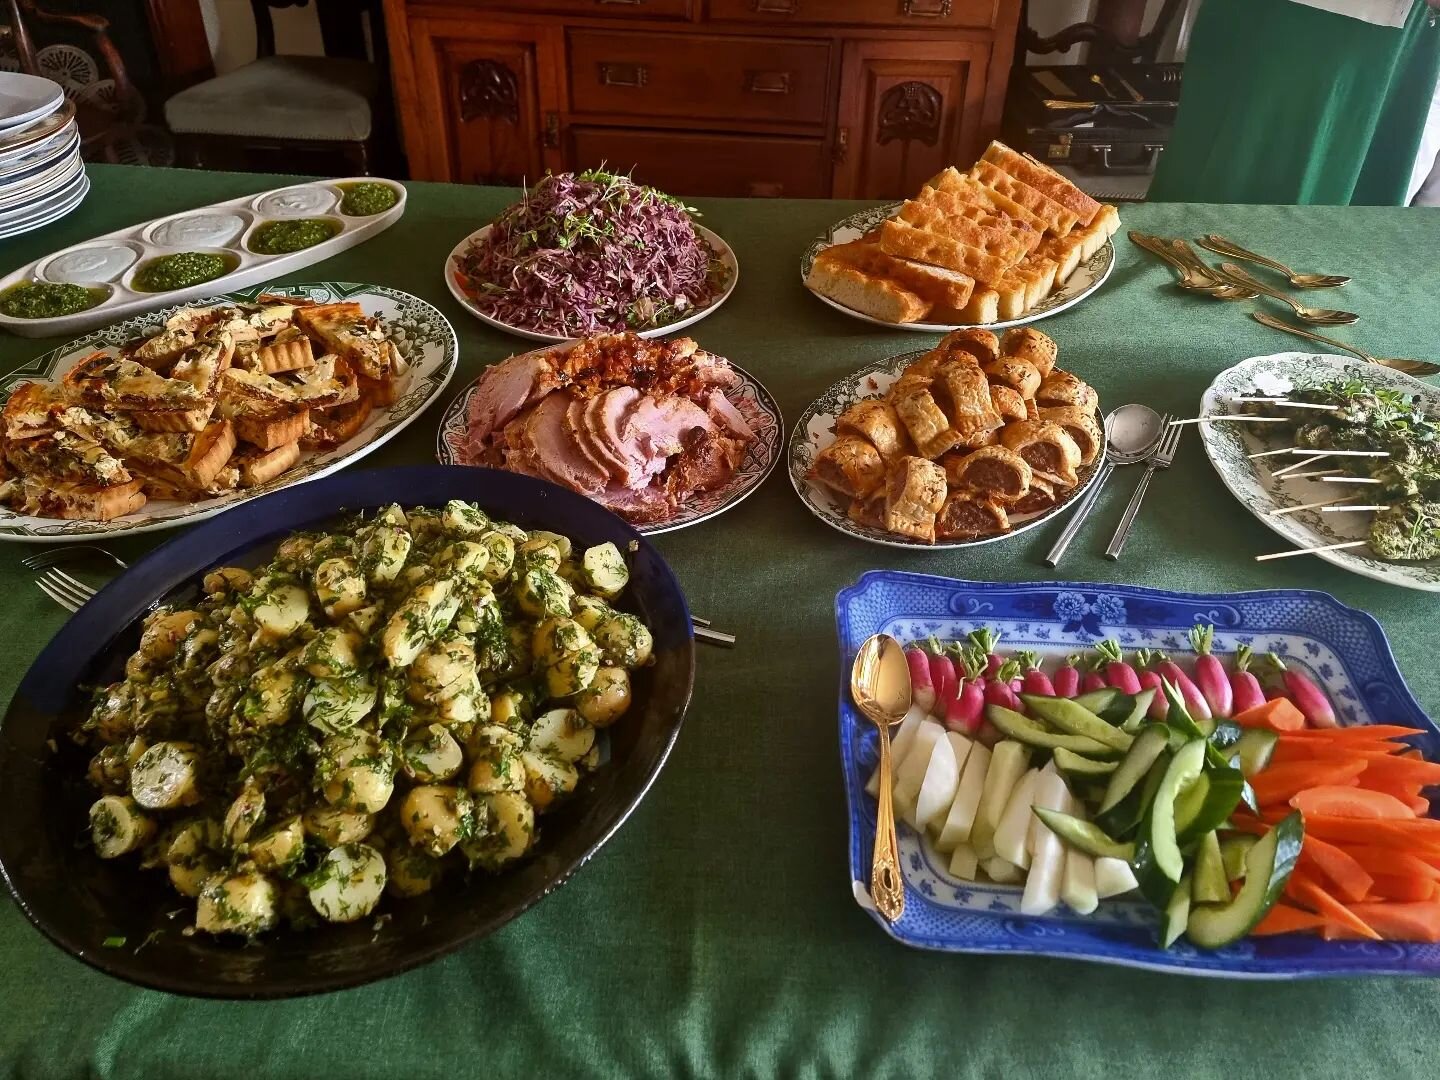 Happily catered this family get together on Sunday. They wanted a simple, traditional picnic style spread. Honey mustard ham, sausage rolls, tarts, foccacia, salads a plenty.
.
.
.
#dropofflunchkent #dropofflunchmargate #whitstablecaterer 
#foodbygeo